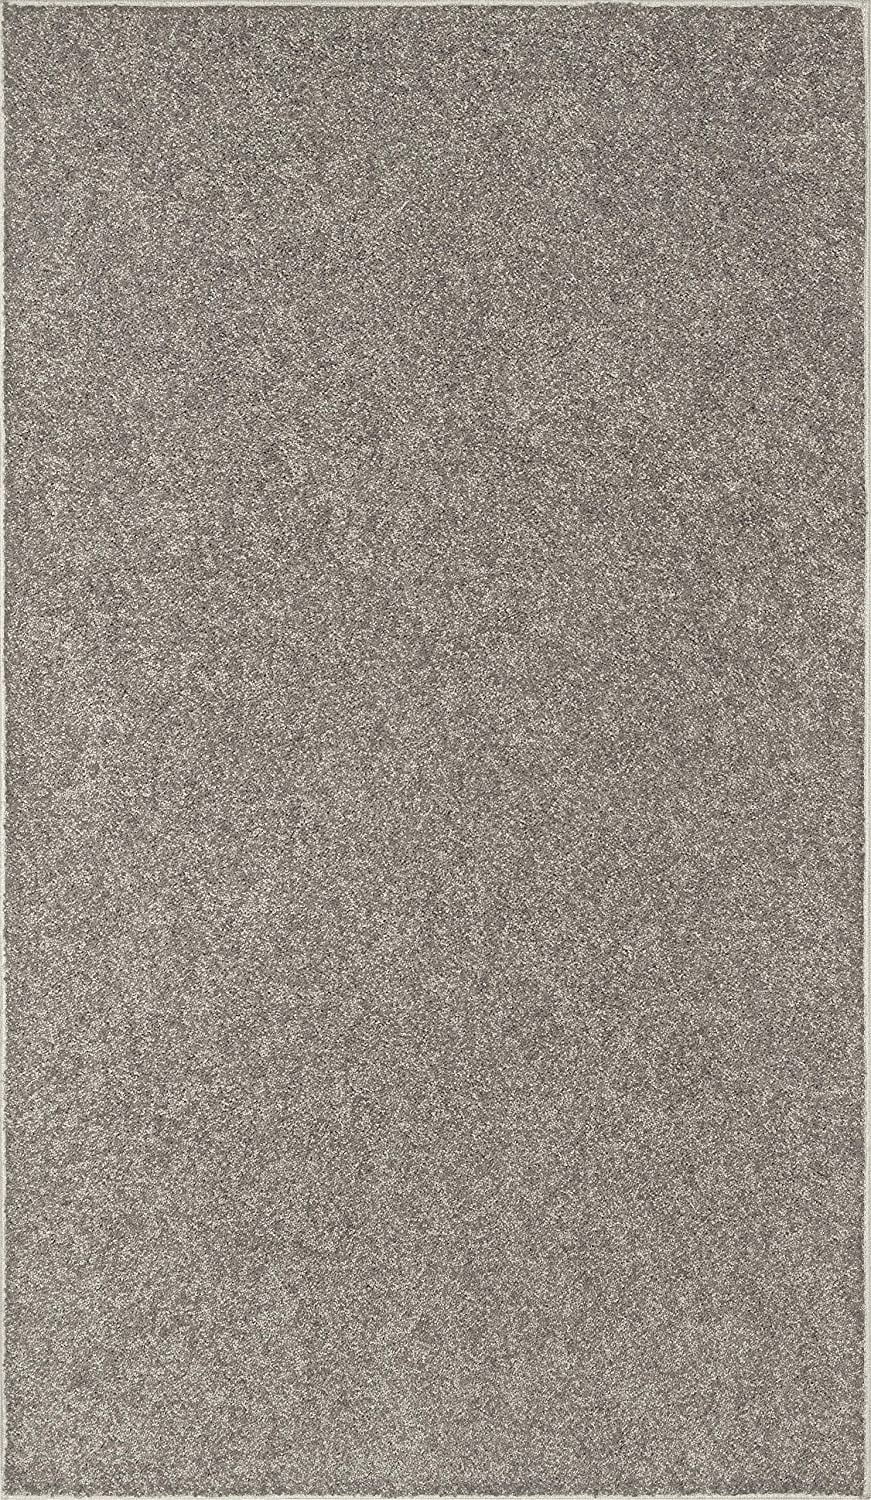 Bright-House Solid Color Area Rug 